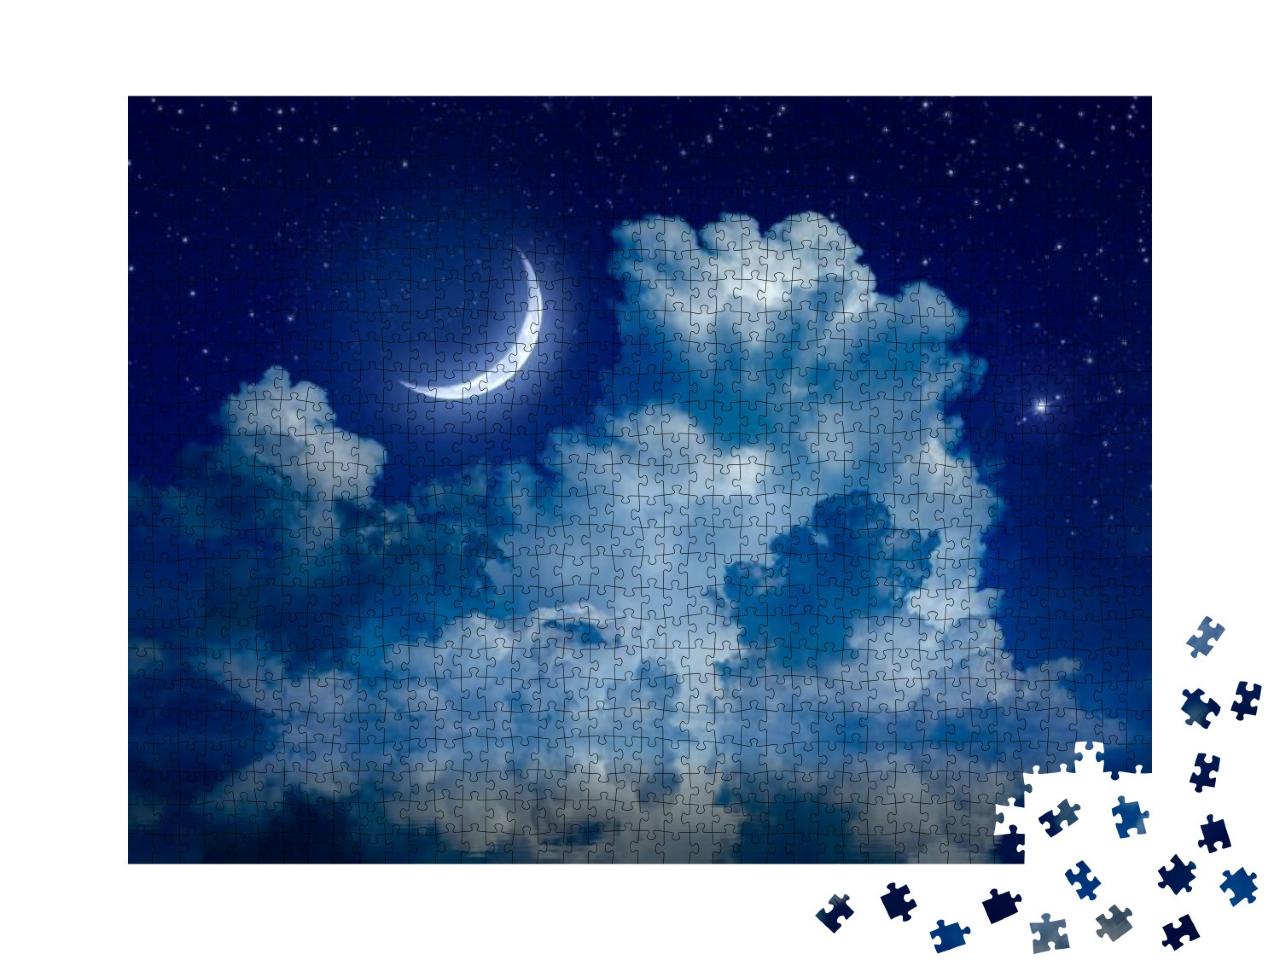 Big Crescent Moon & Clouds in Night Starry Sky is Reflect... Jigsaw Puzzle with 1000 pieces